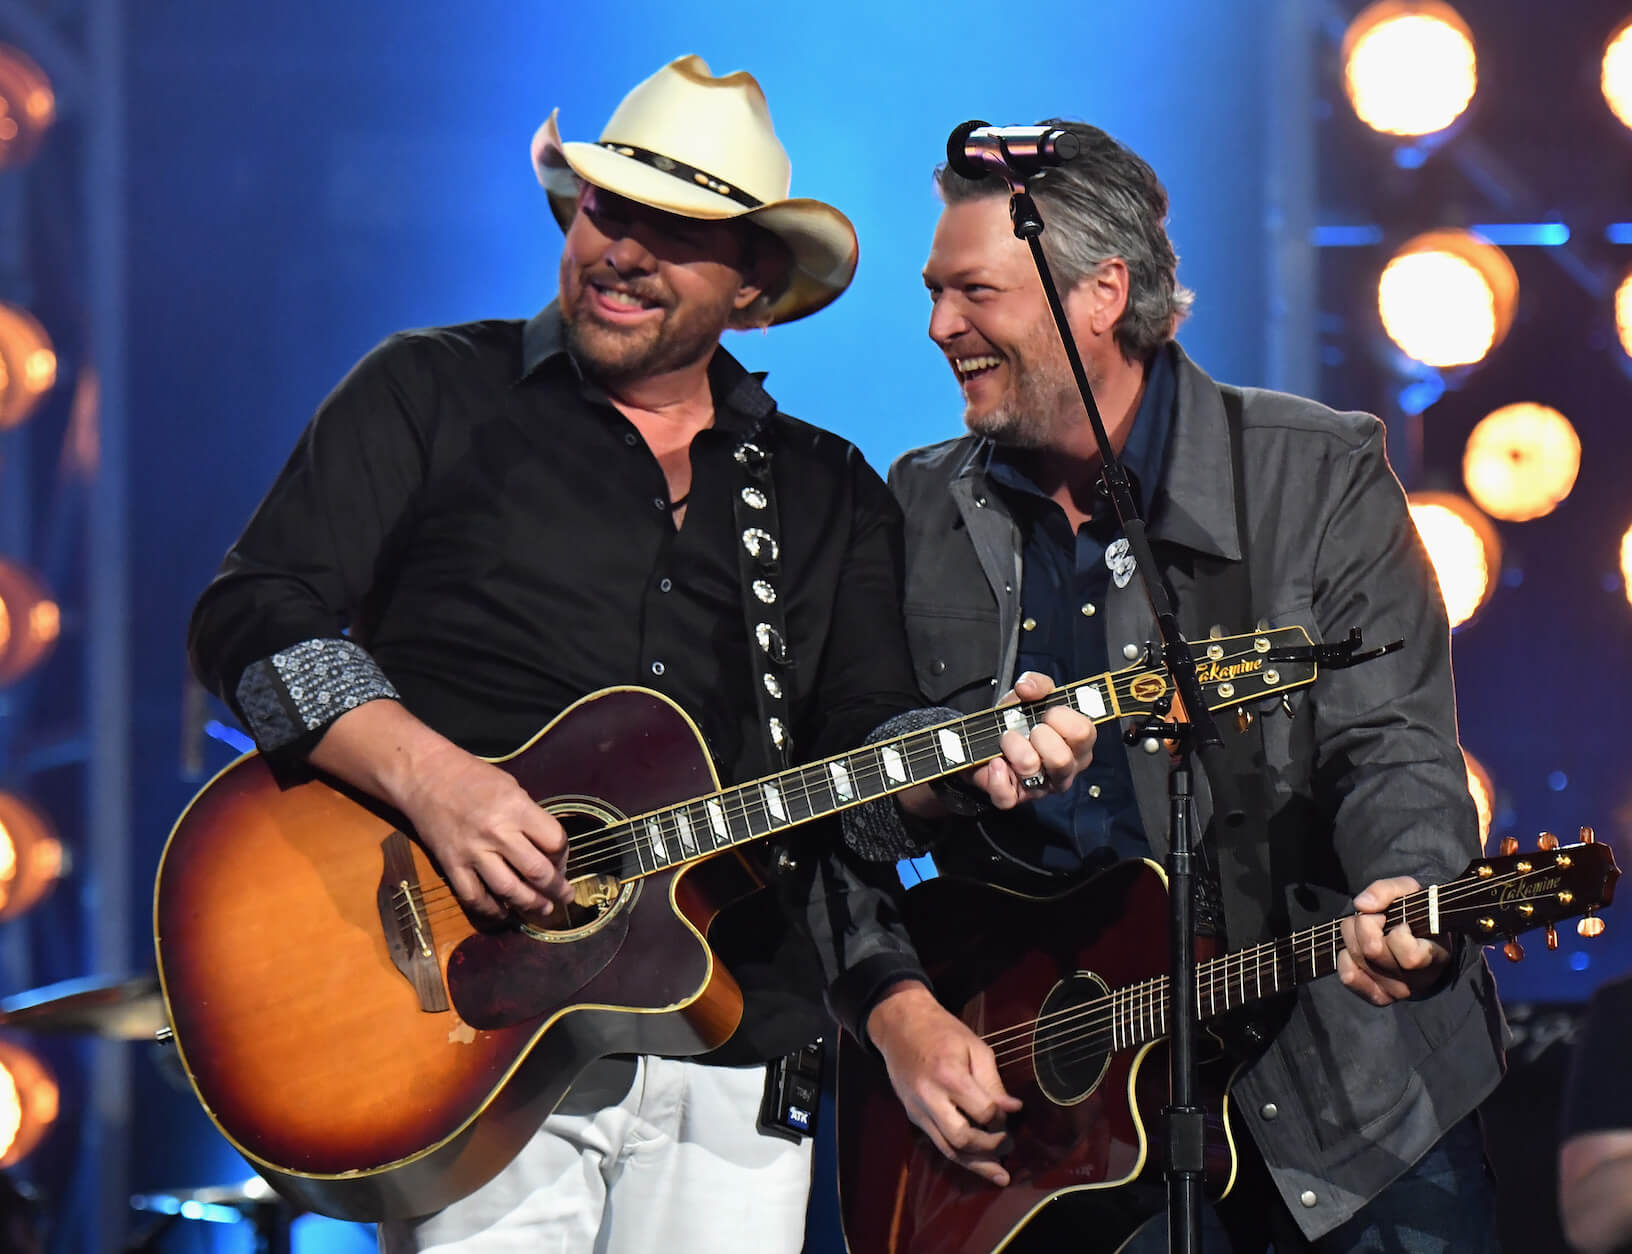 Toby Keith and Blake Shelton laughing on stage while holding guitars